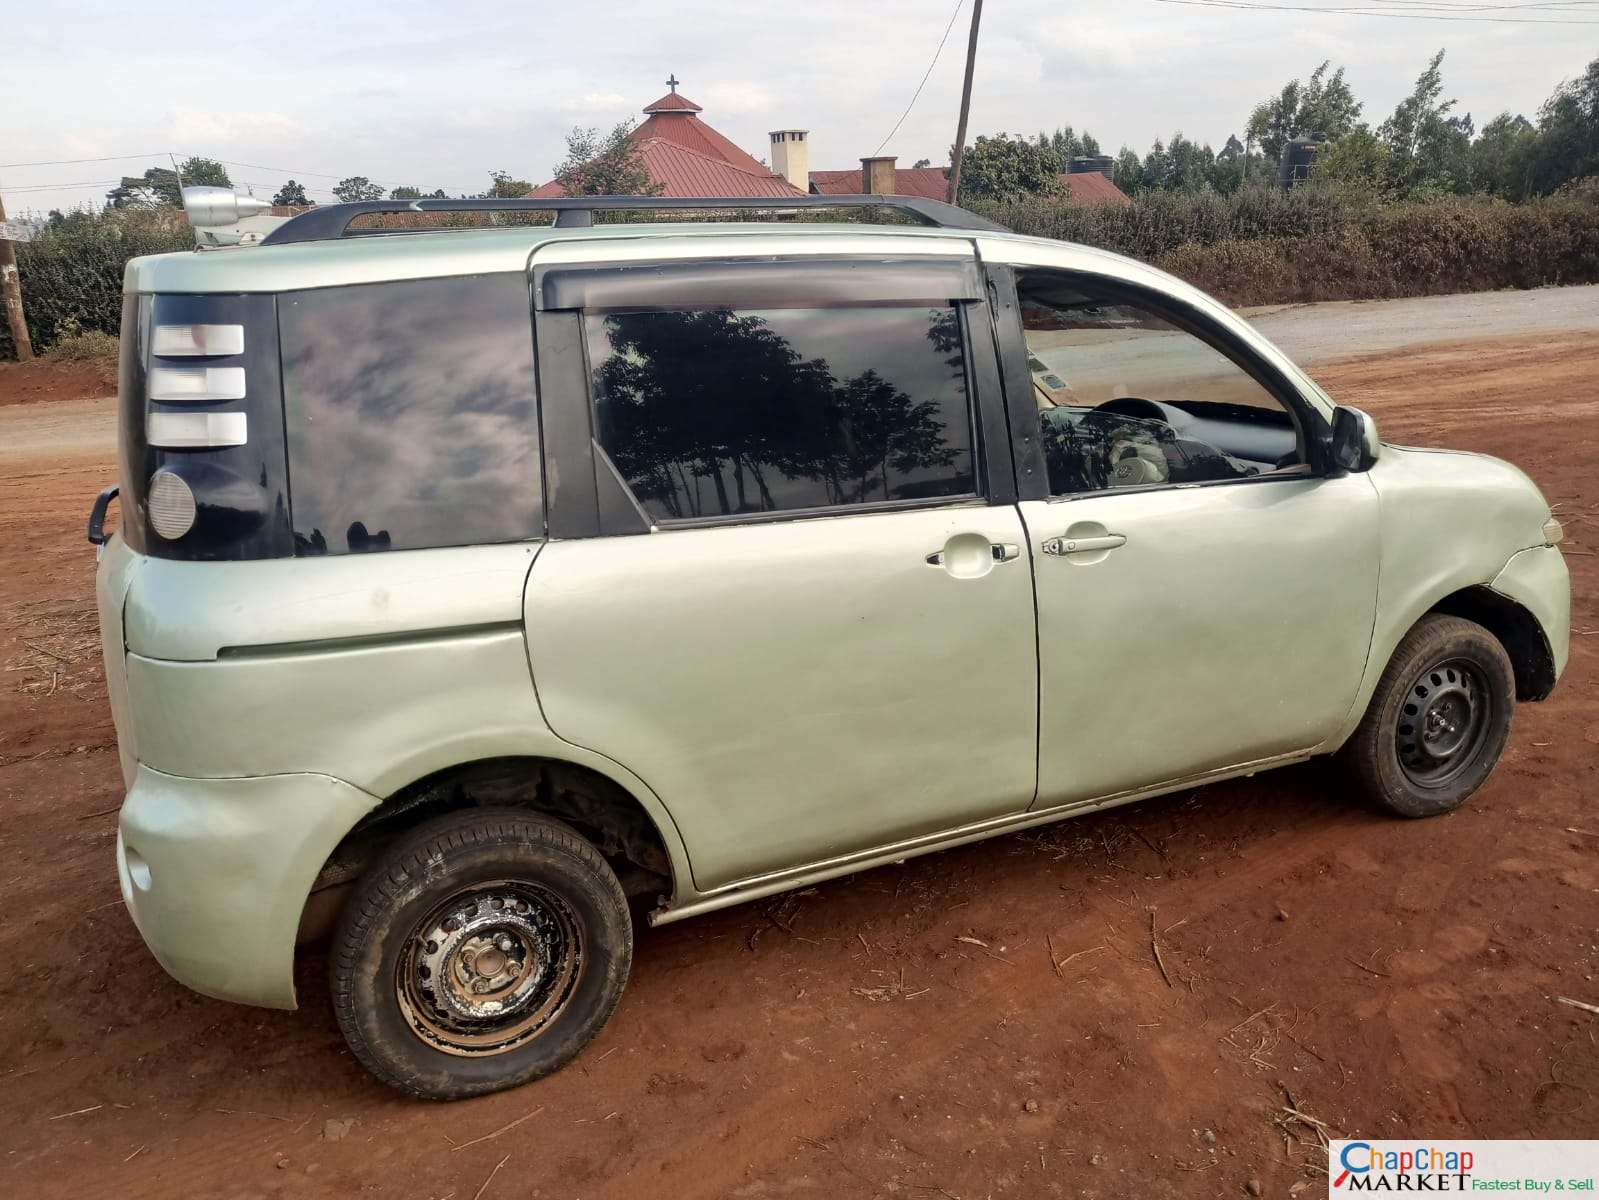 Toyota SIENTA for Sale in Kenya QUICK SALE You Pay 30% Deposit Trade in OK EXCLUSIVE hire purchase installments